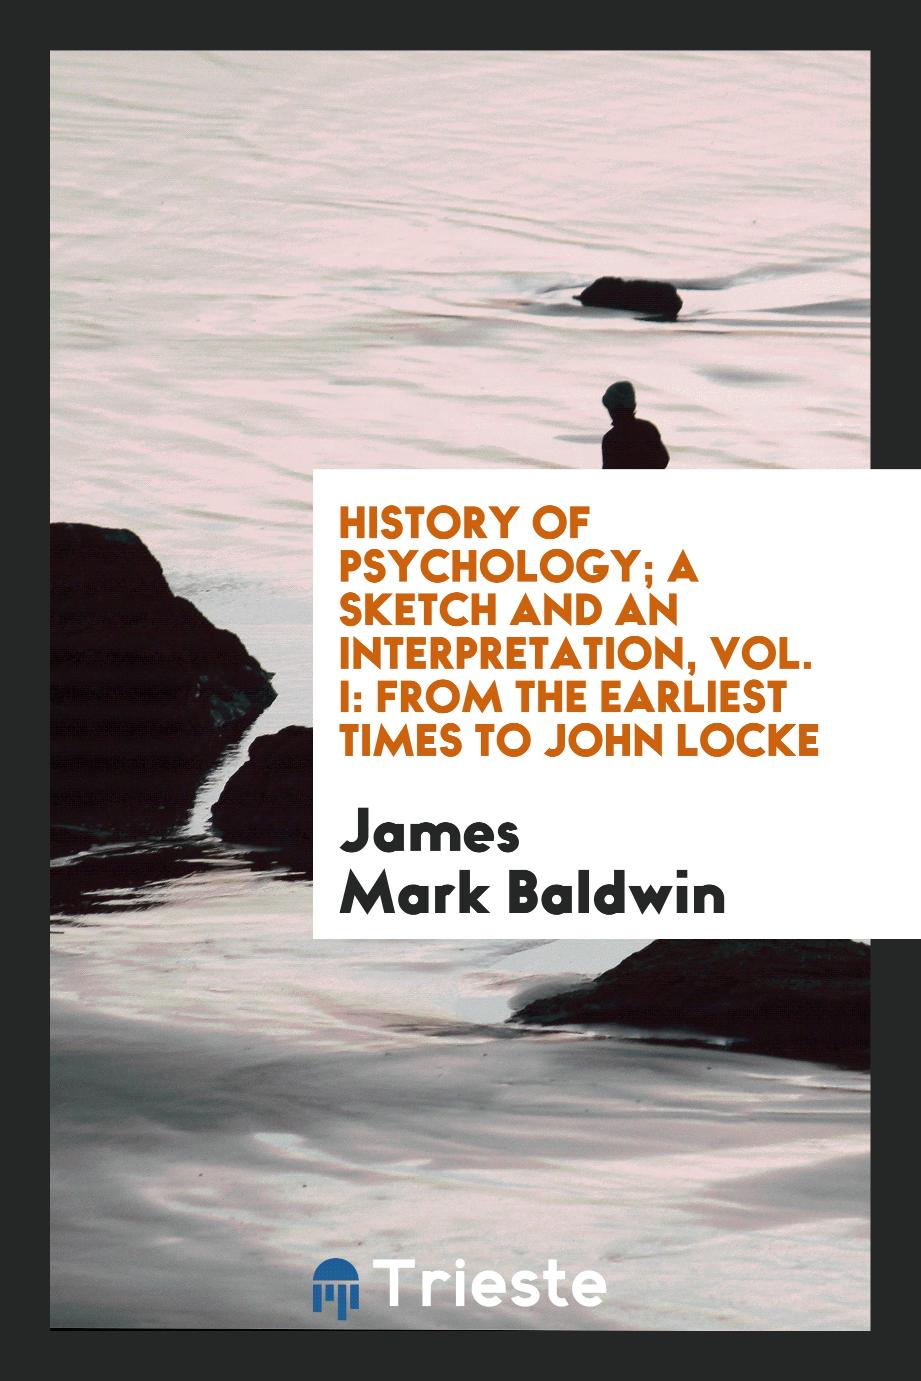 History of psychology; a sketch and an interpretation, Vol. I: From the earliest times to John Locke